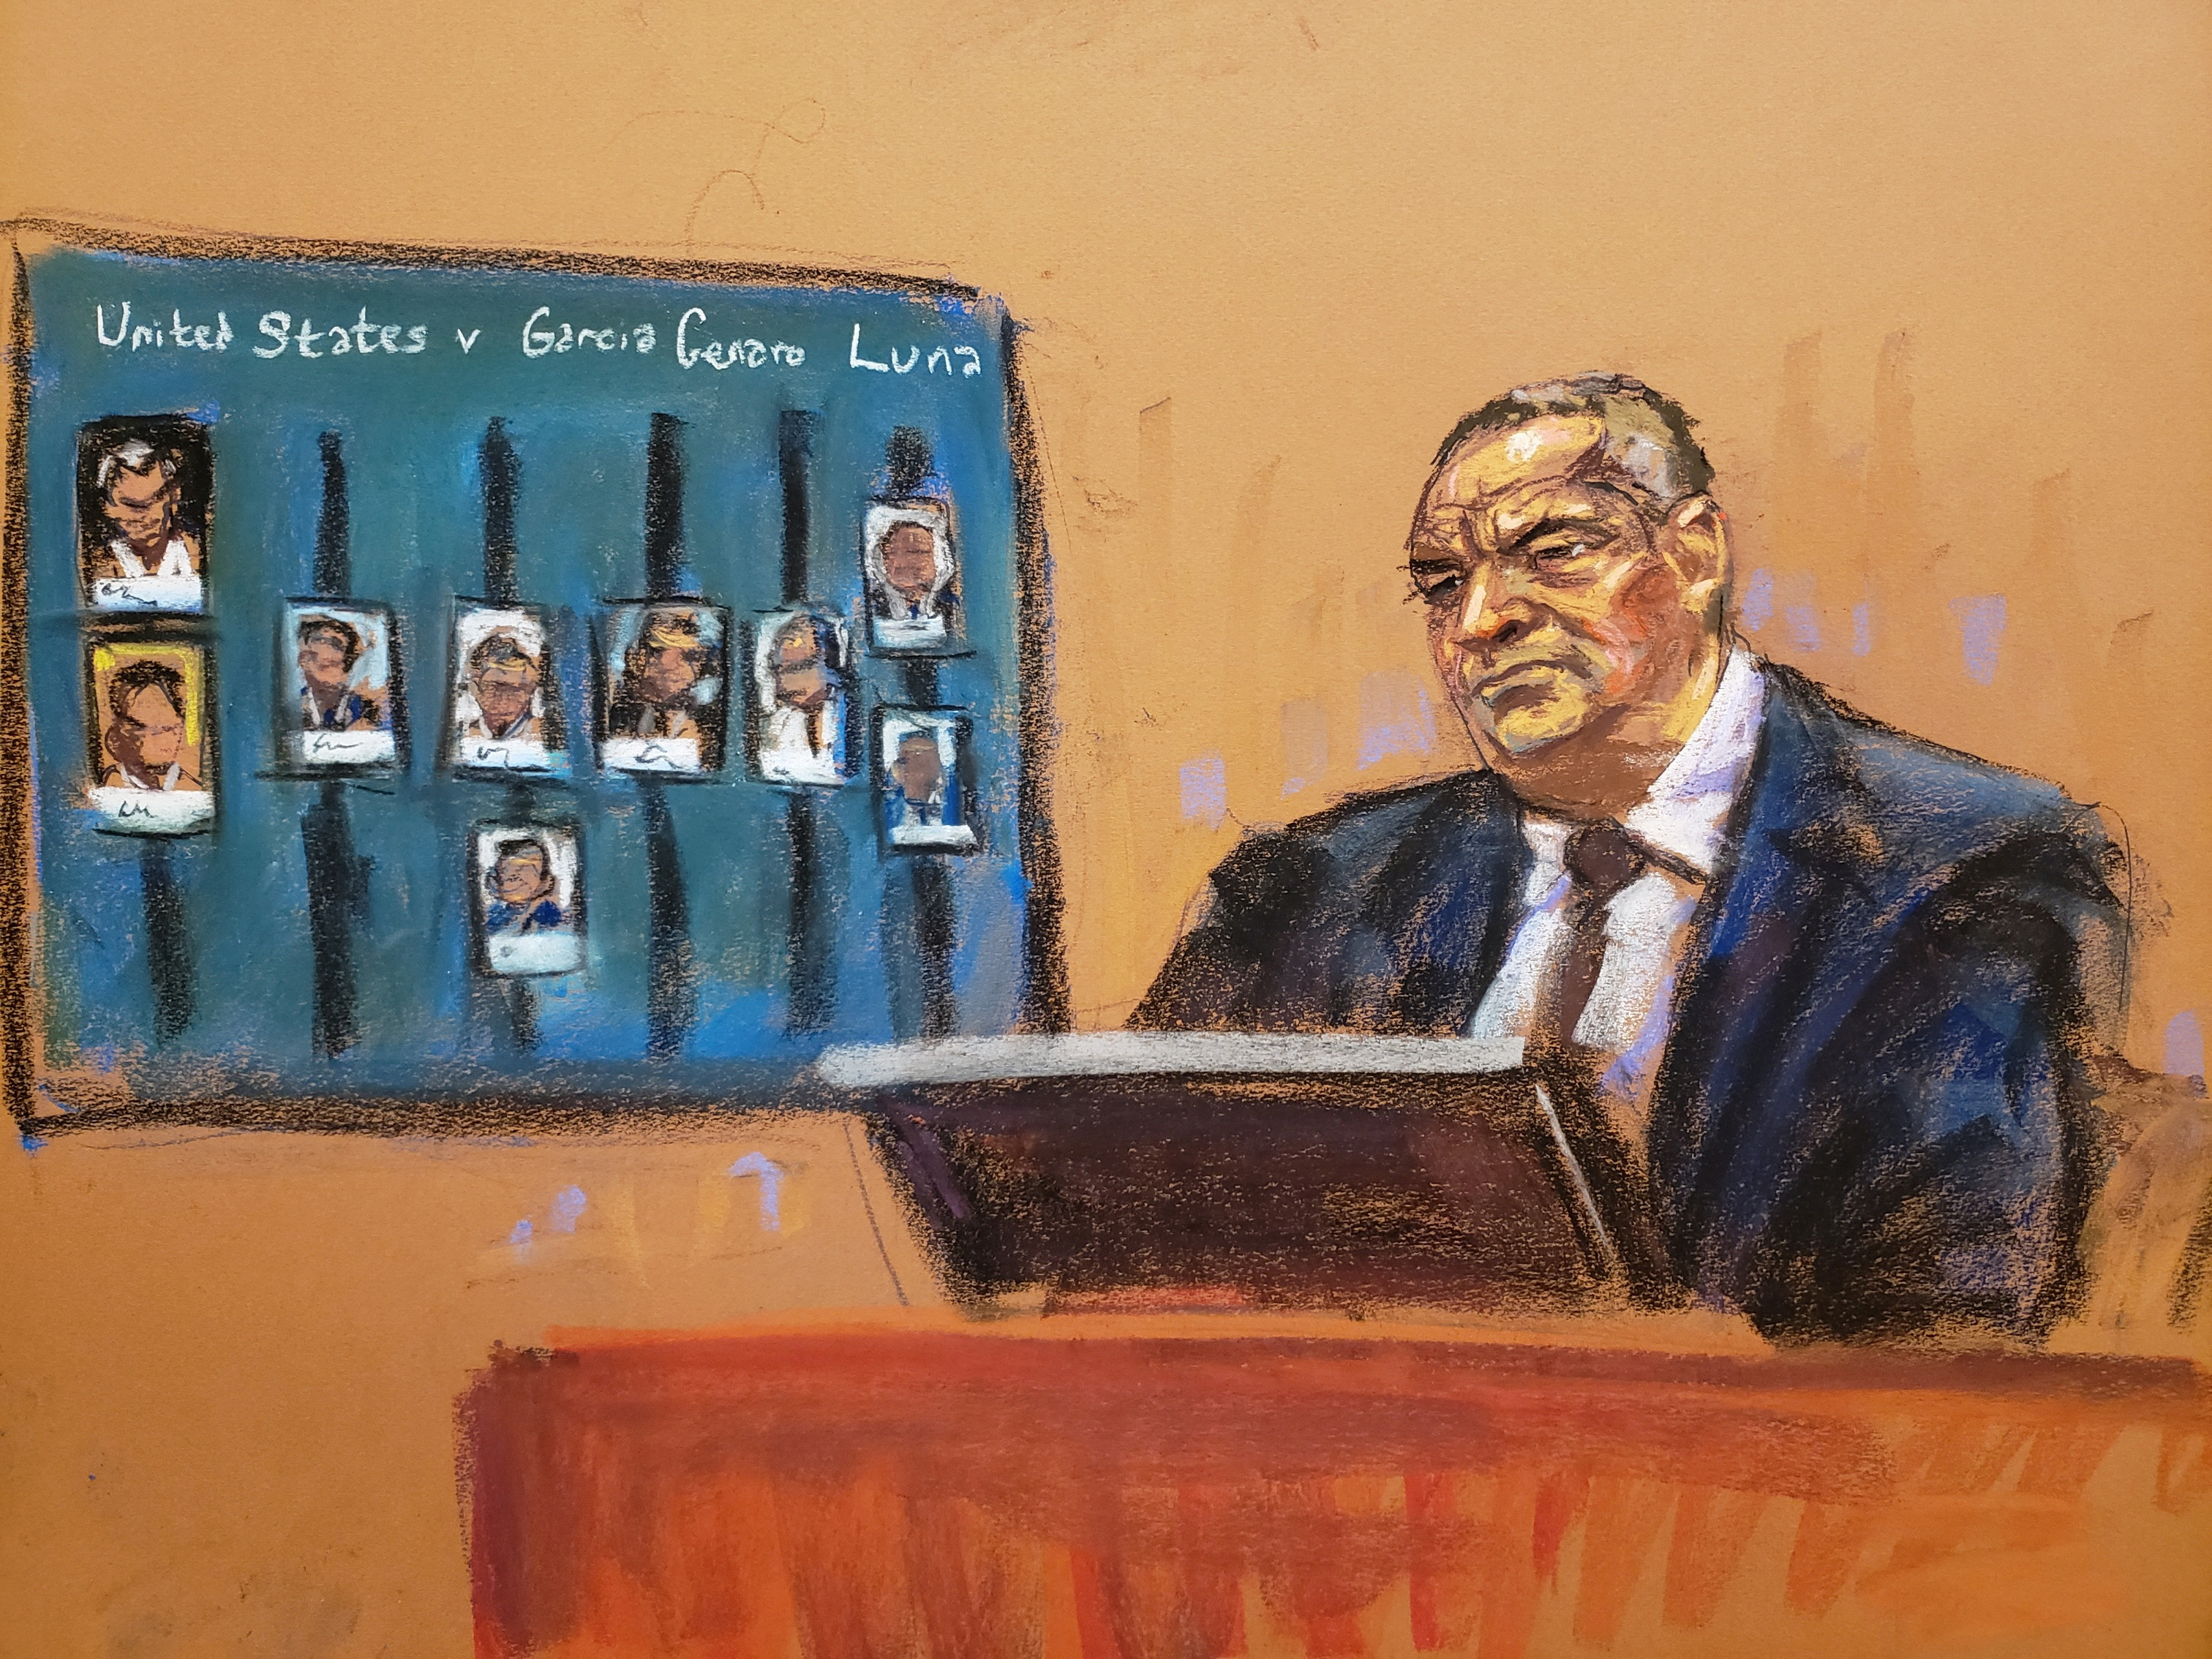 The drug trafficker explained that when he began working for the Leyva clan in 2001, García Luna was already on the cartel's payroll (REUTERS/Jane Rosenberg)